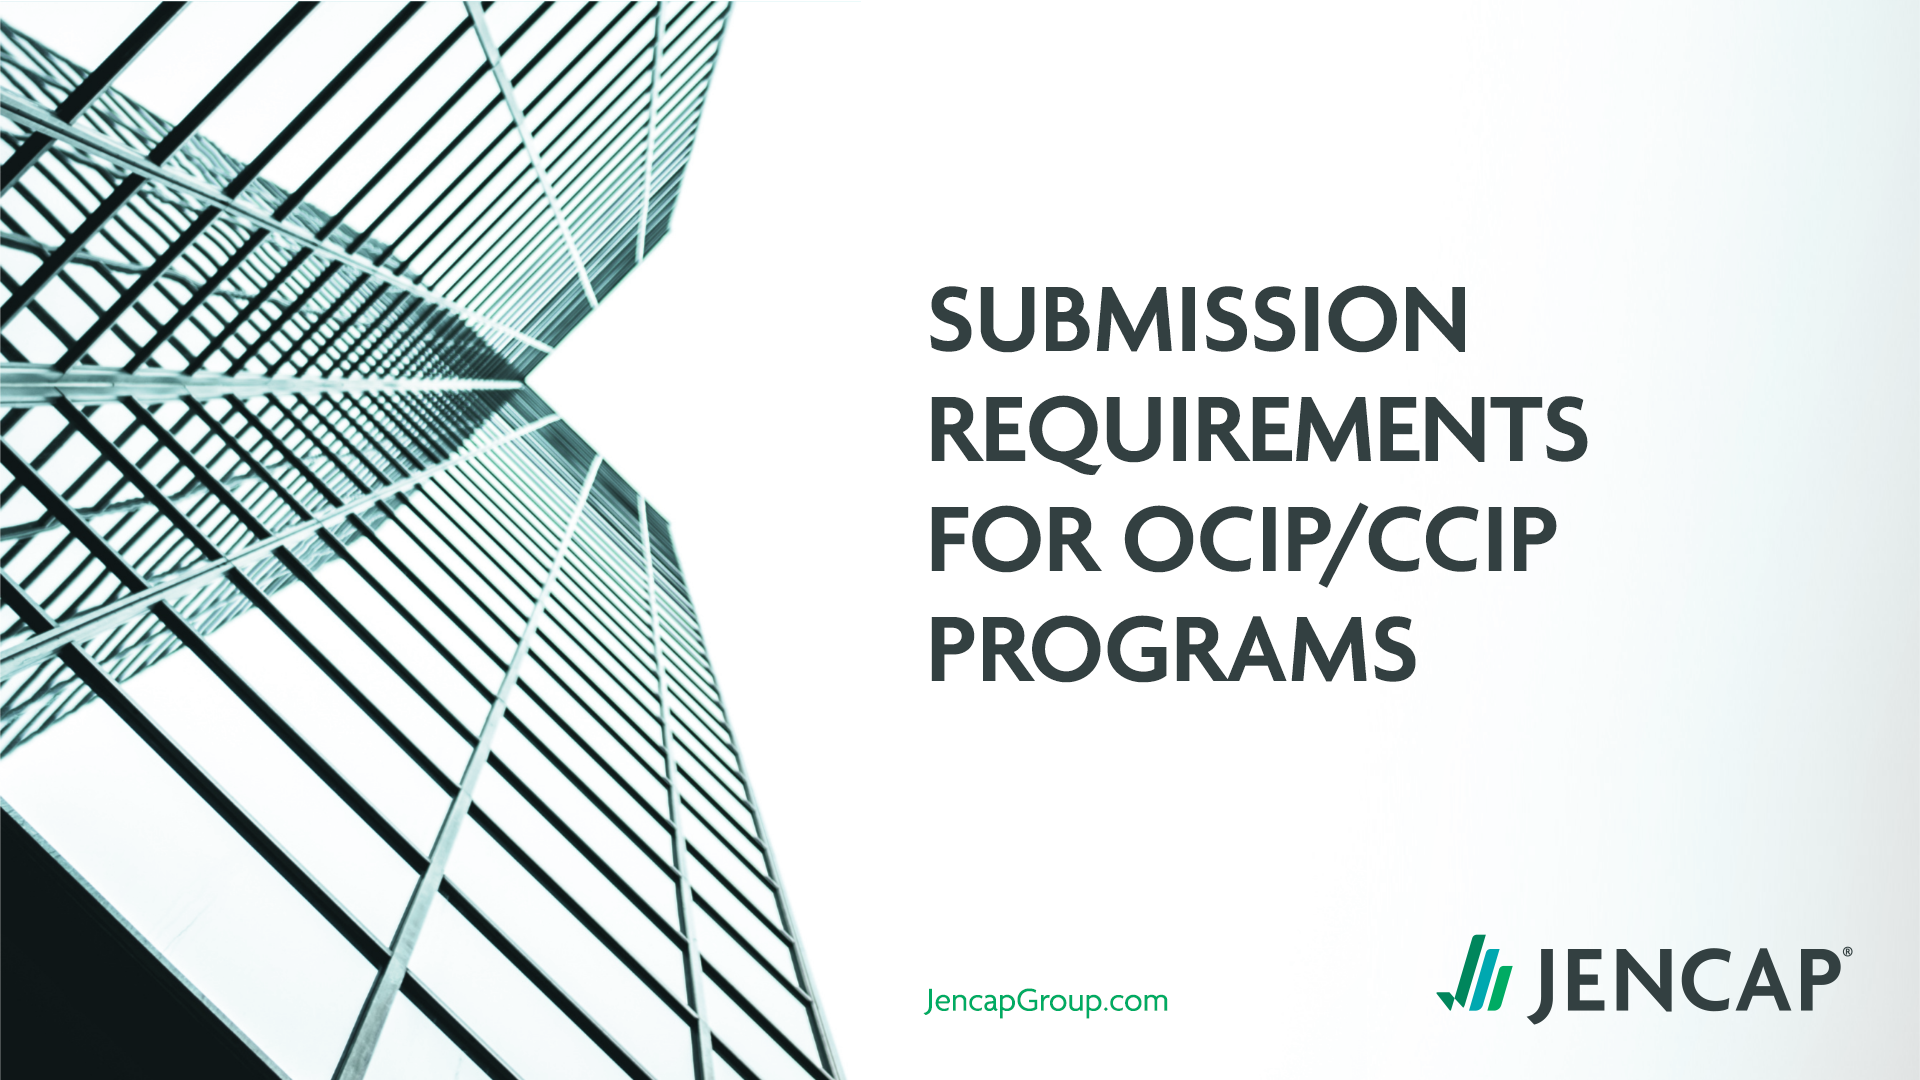 Submission Requirements for OCIP/CCIP programs